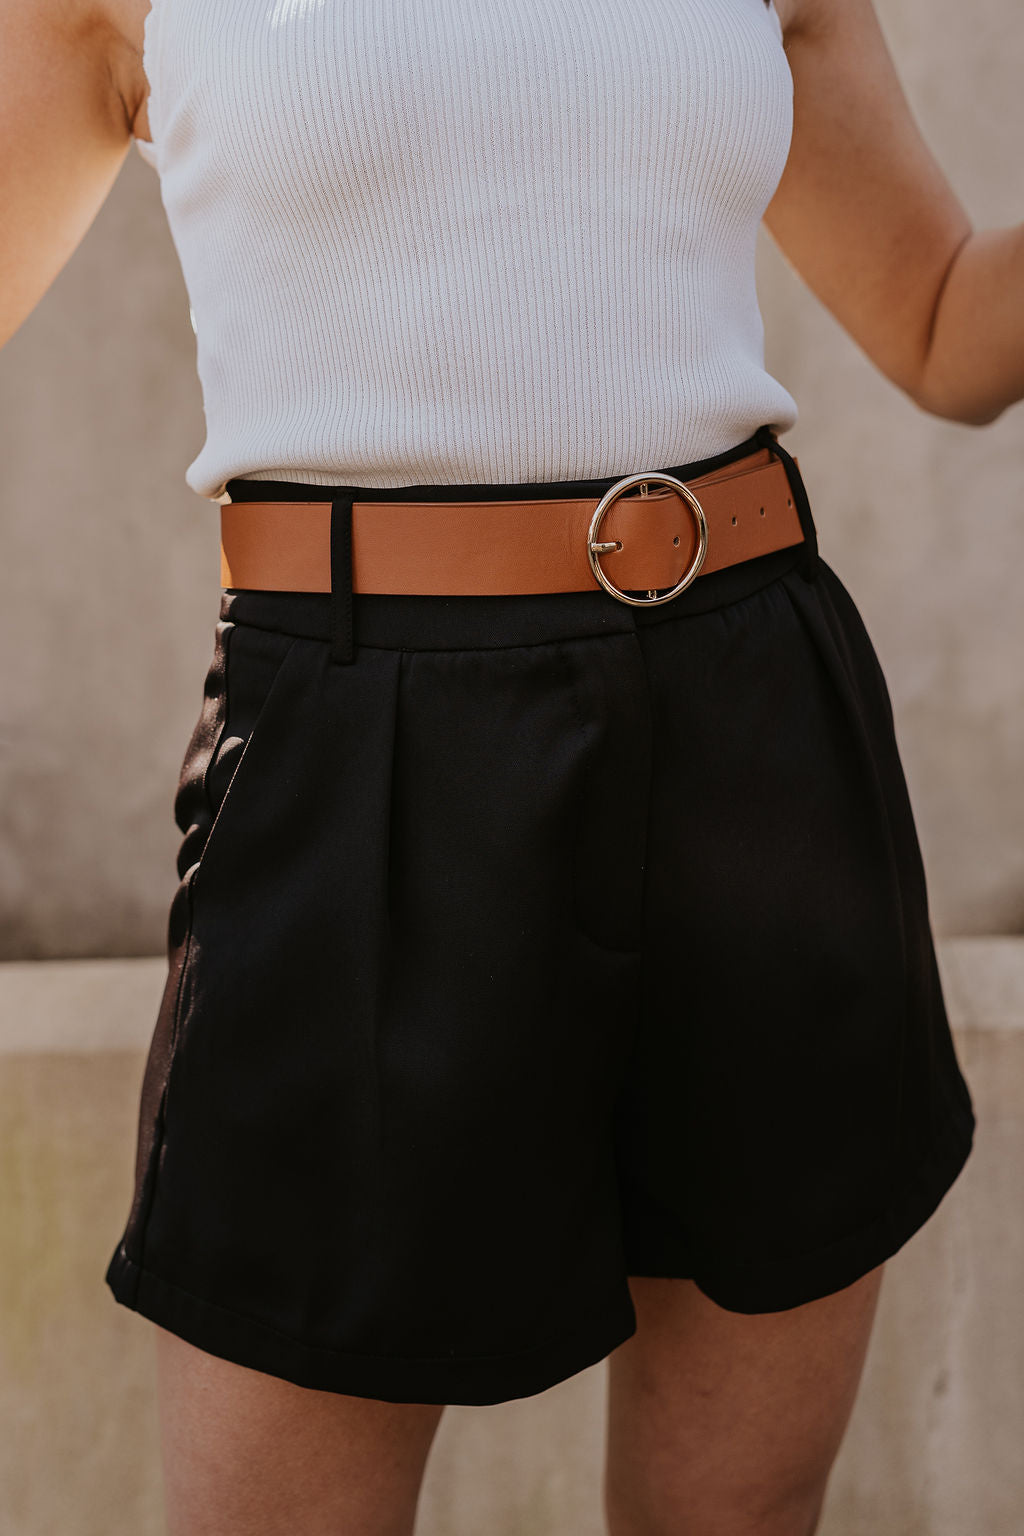 Close up view of model wearing the Tiffany Black Shorts which features black fabric with black lining, a front zipper with hook closures, side pockets, faux back pocket details, belt loops, and front pleats.